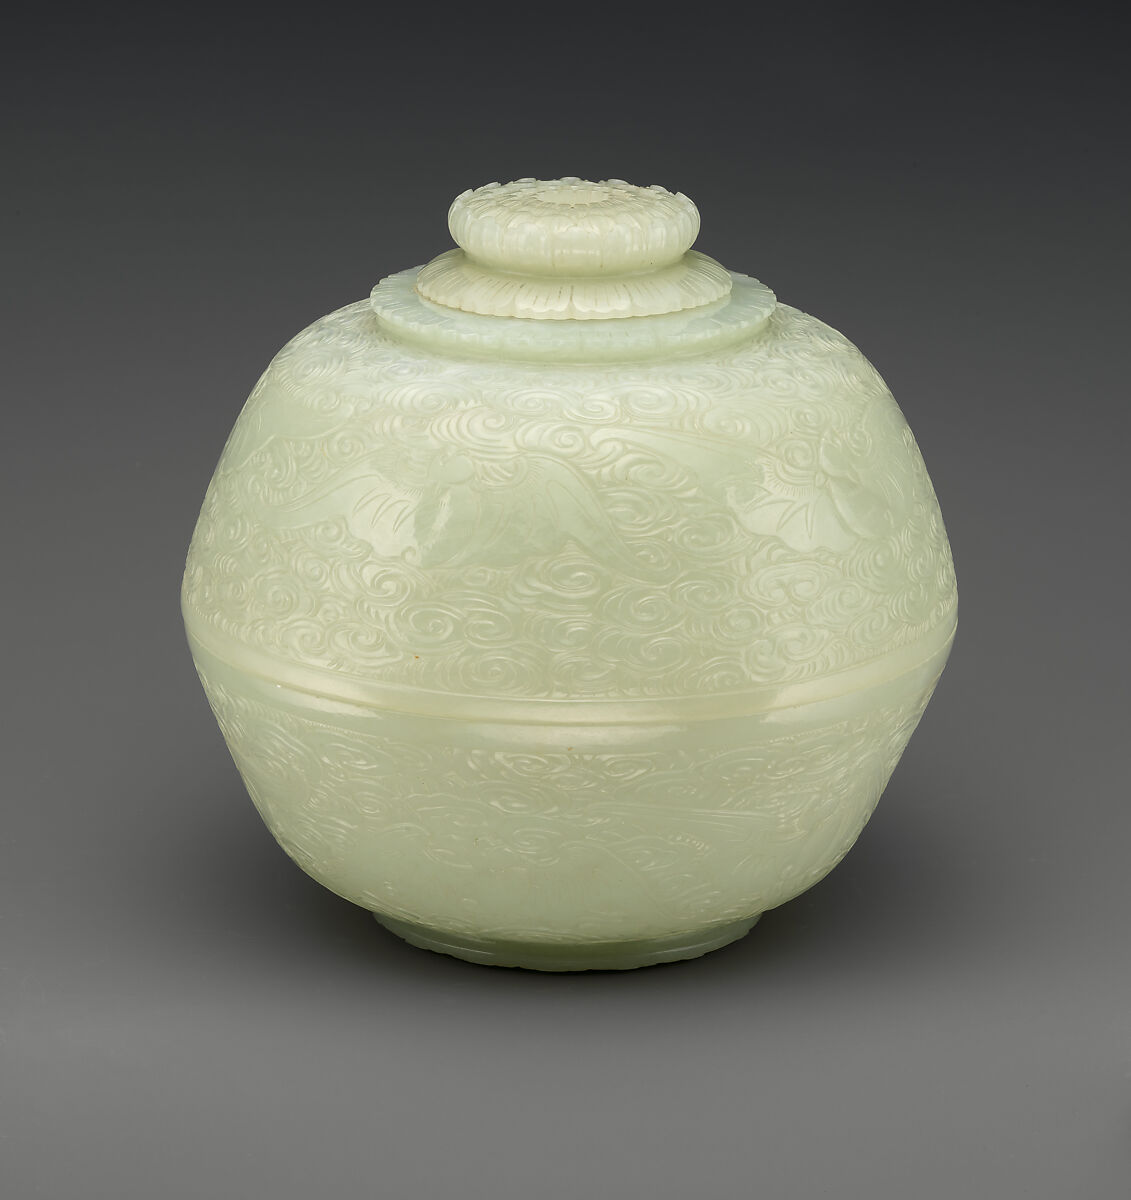 Bowl and cover, Nephrite, white with very light greenish tint, China 